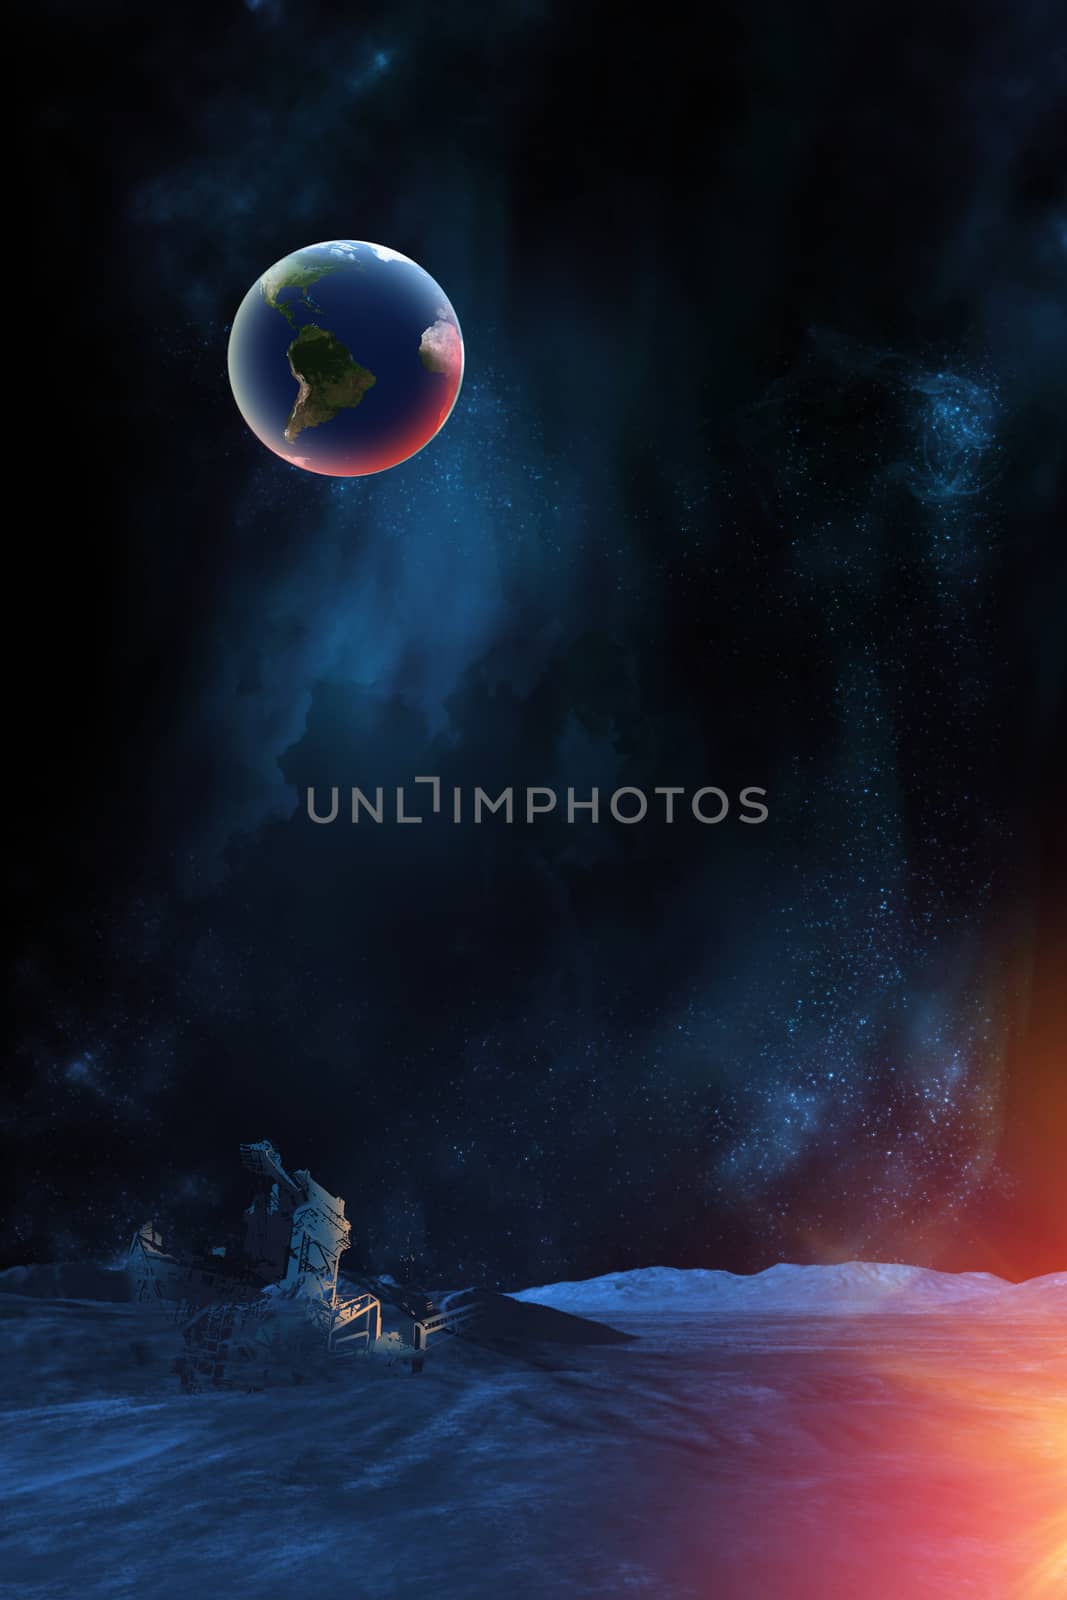 Celestial digital art, earth plant from moon surface viewpoint, stars and galaxies in outer space showing the beauty of space exploration. Planet texture furnished by NASA, 3d Render, 3d Illustration